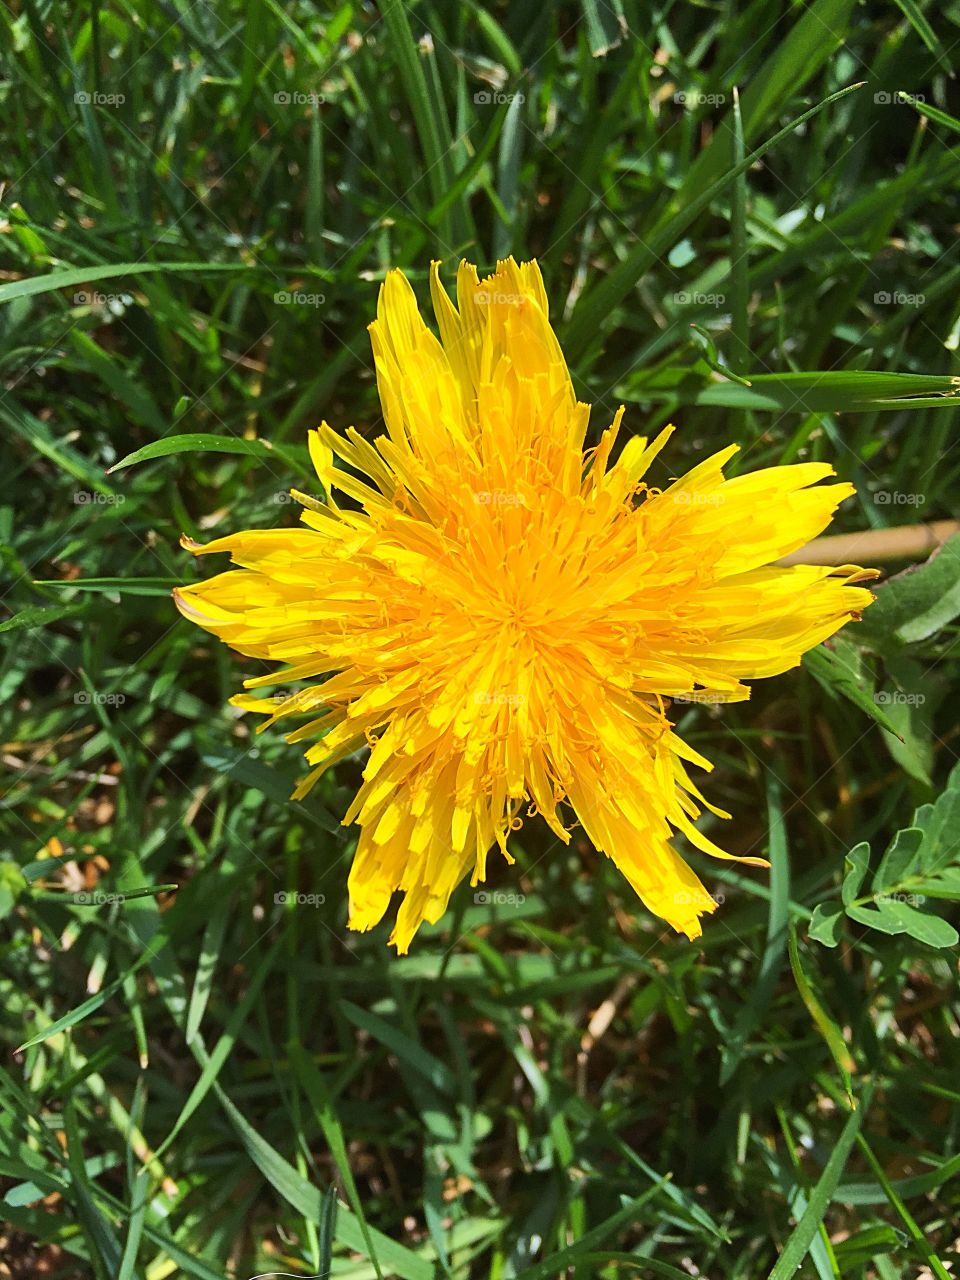 A beautiful, star shaped, dandelion. Some see a weed, I see a thing of beauty! 